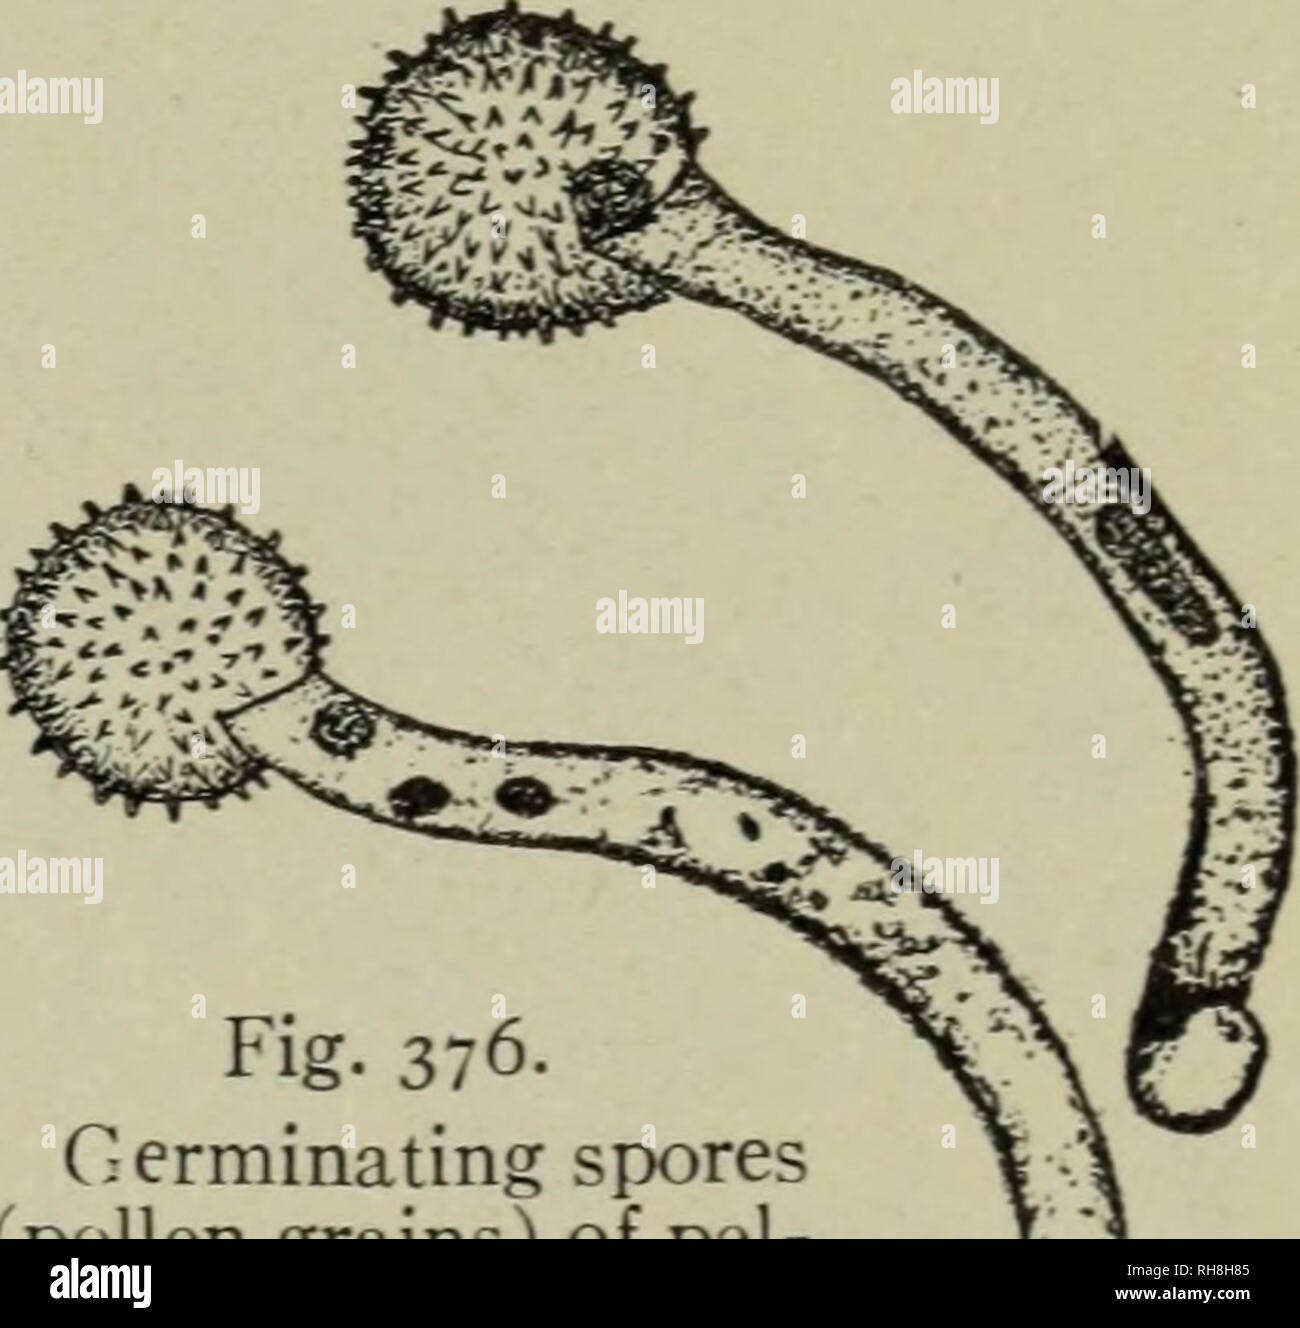 . Botany for high schools. Botany. Fig. 375- Nearly mature pollen grain of tril- lium. The smaller cell is the genera- tive cell. which floats in the tube cell but at first is s:parated by a thin arched cell wall (fig. 375). This is the generative cell or body cell, and was formed on germination of the young microspore by the division of the single nucleus of the microspore before the pollen grain was ripe. After the pollen grain has reached the stigma of the pistil (see Pollination, Chapter XVIII) it germi- nates, producing a tube 'which travels down the style (or in the stylar canal in some  Stock Photo